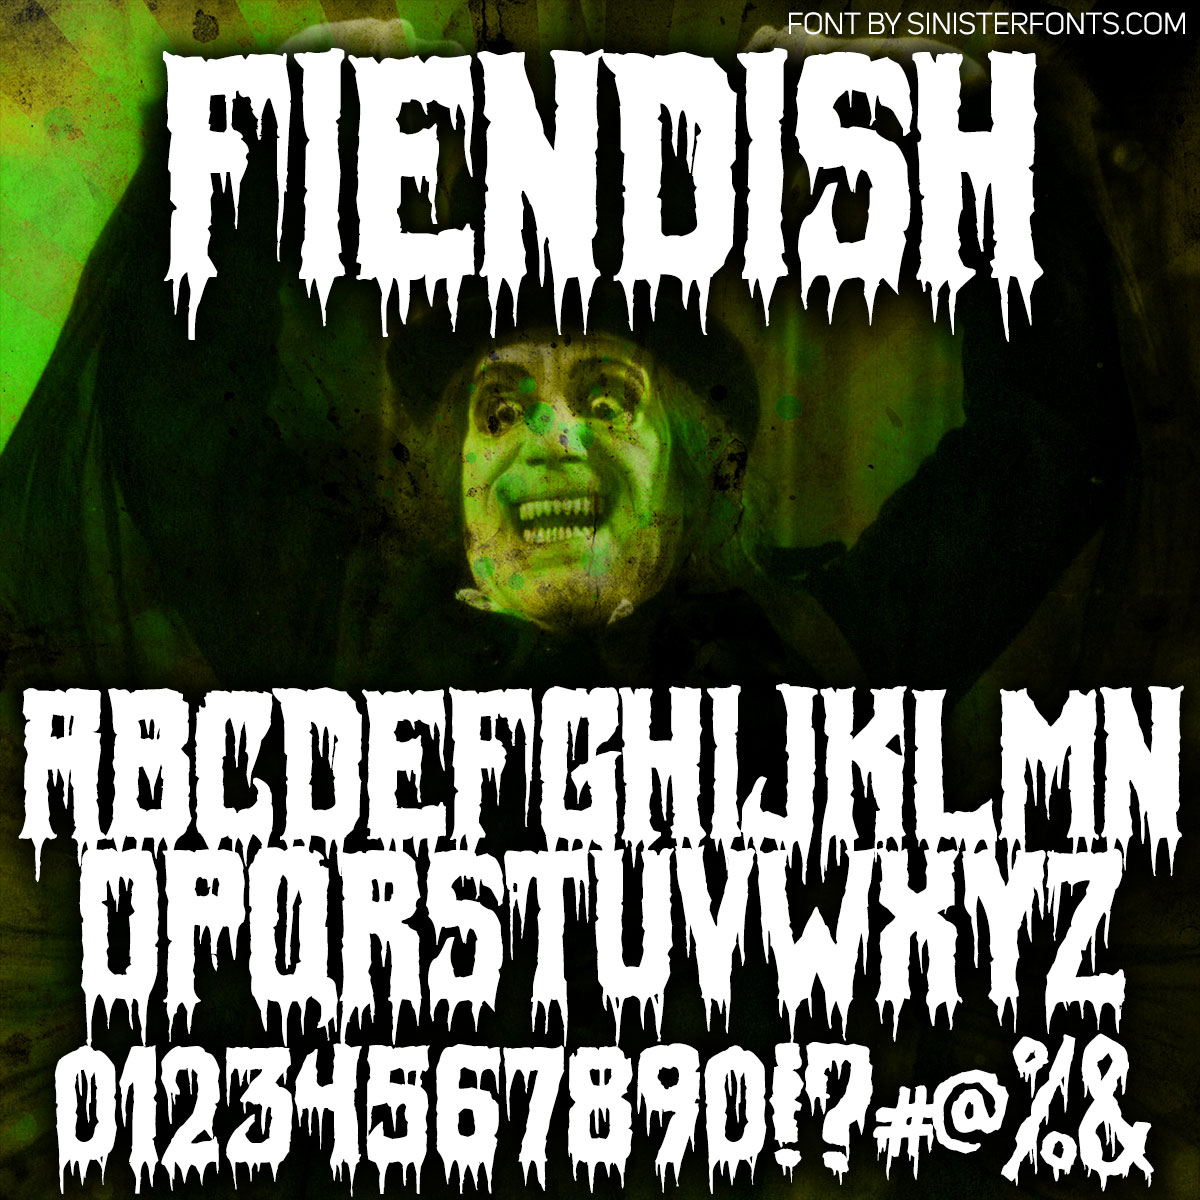 Fiendish Font : Click to Download